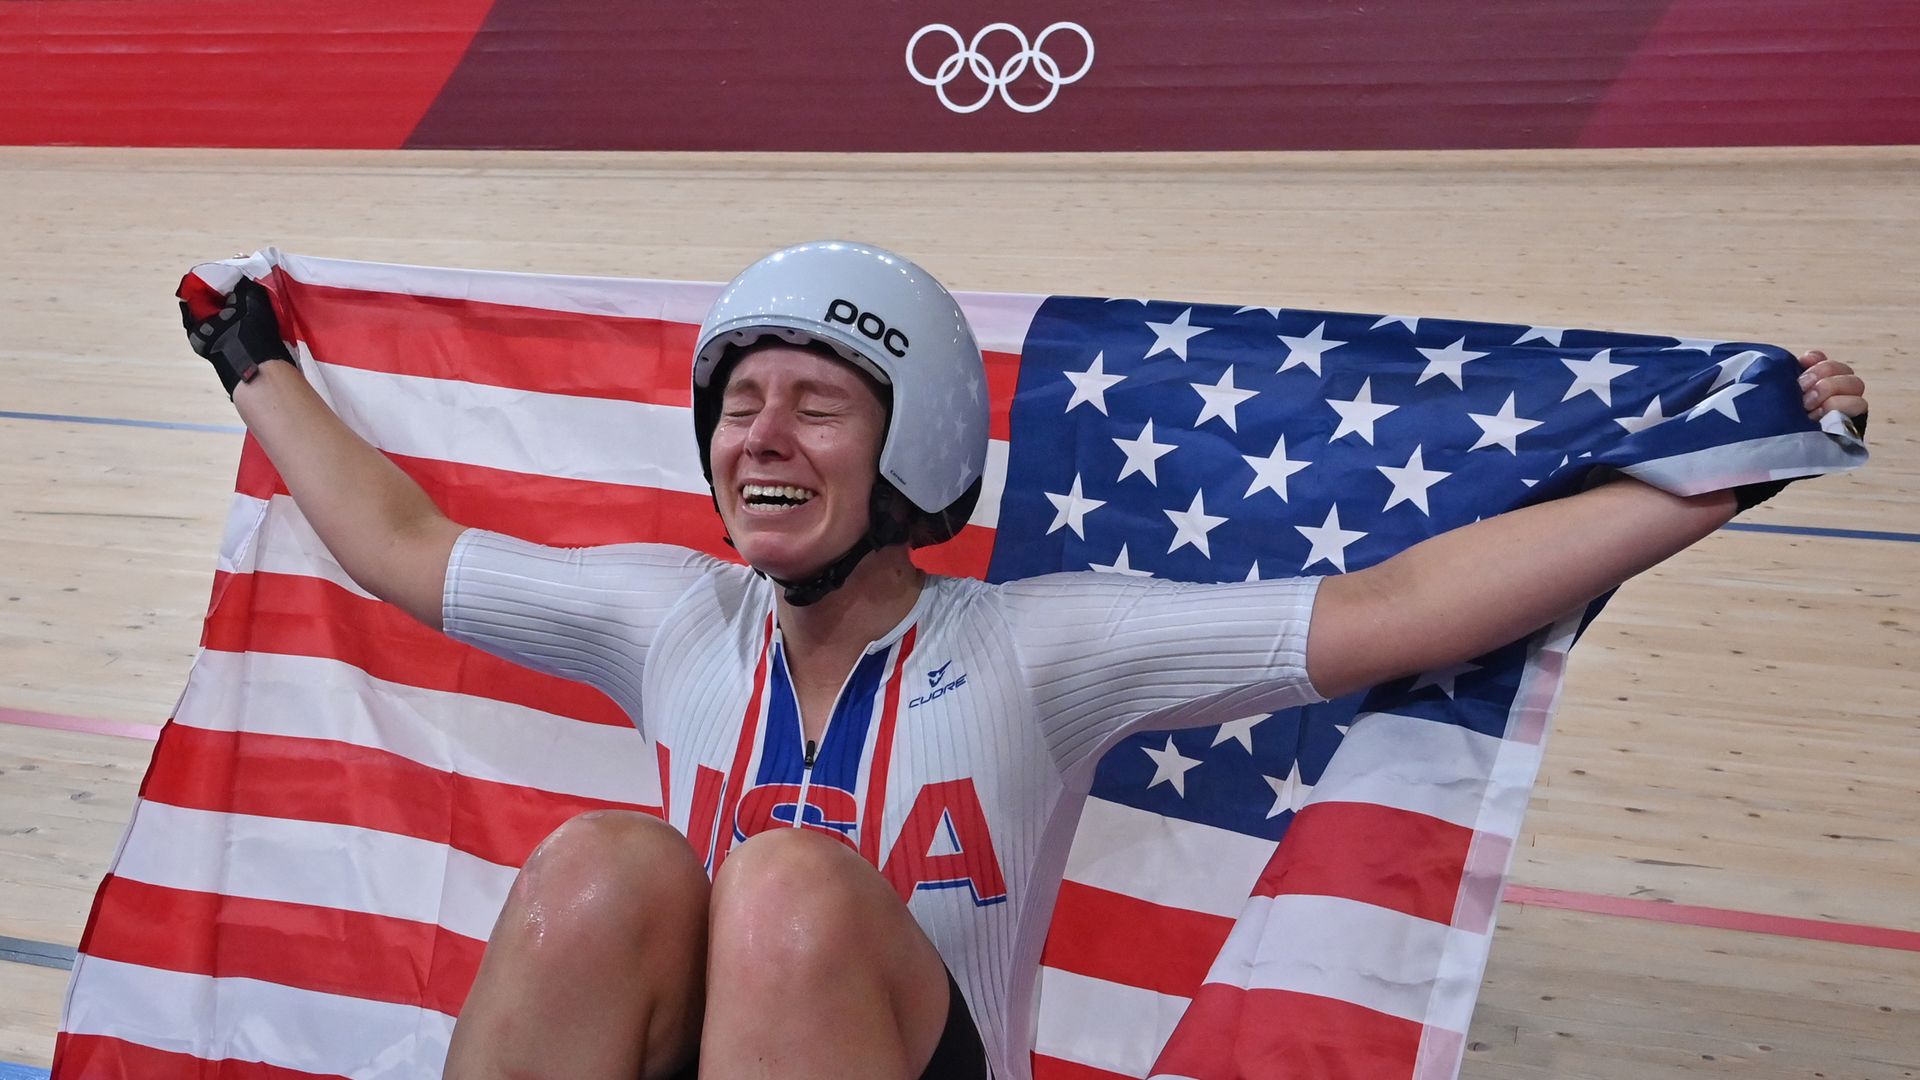 USA's Jennifer Valente poses with a flag after winning the women's track cycling omnium points race during the Tokyo 2020 Olympic Games at Izu Velodrome in Izu, Japan, on August 8